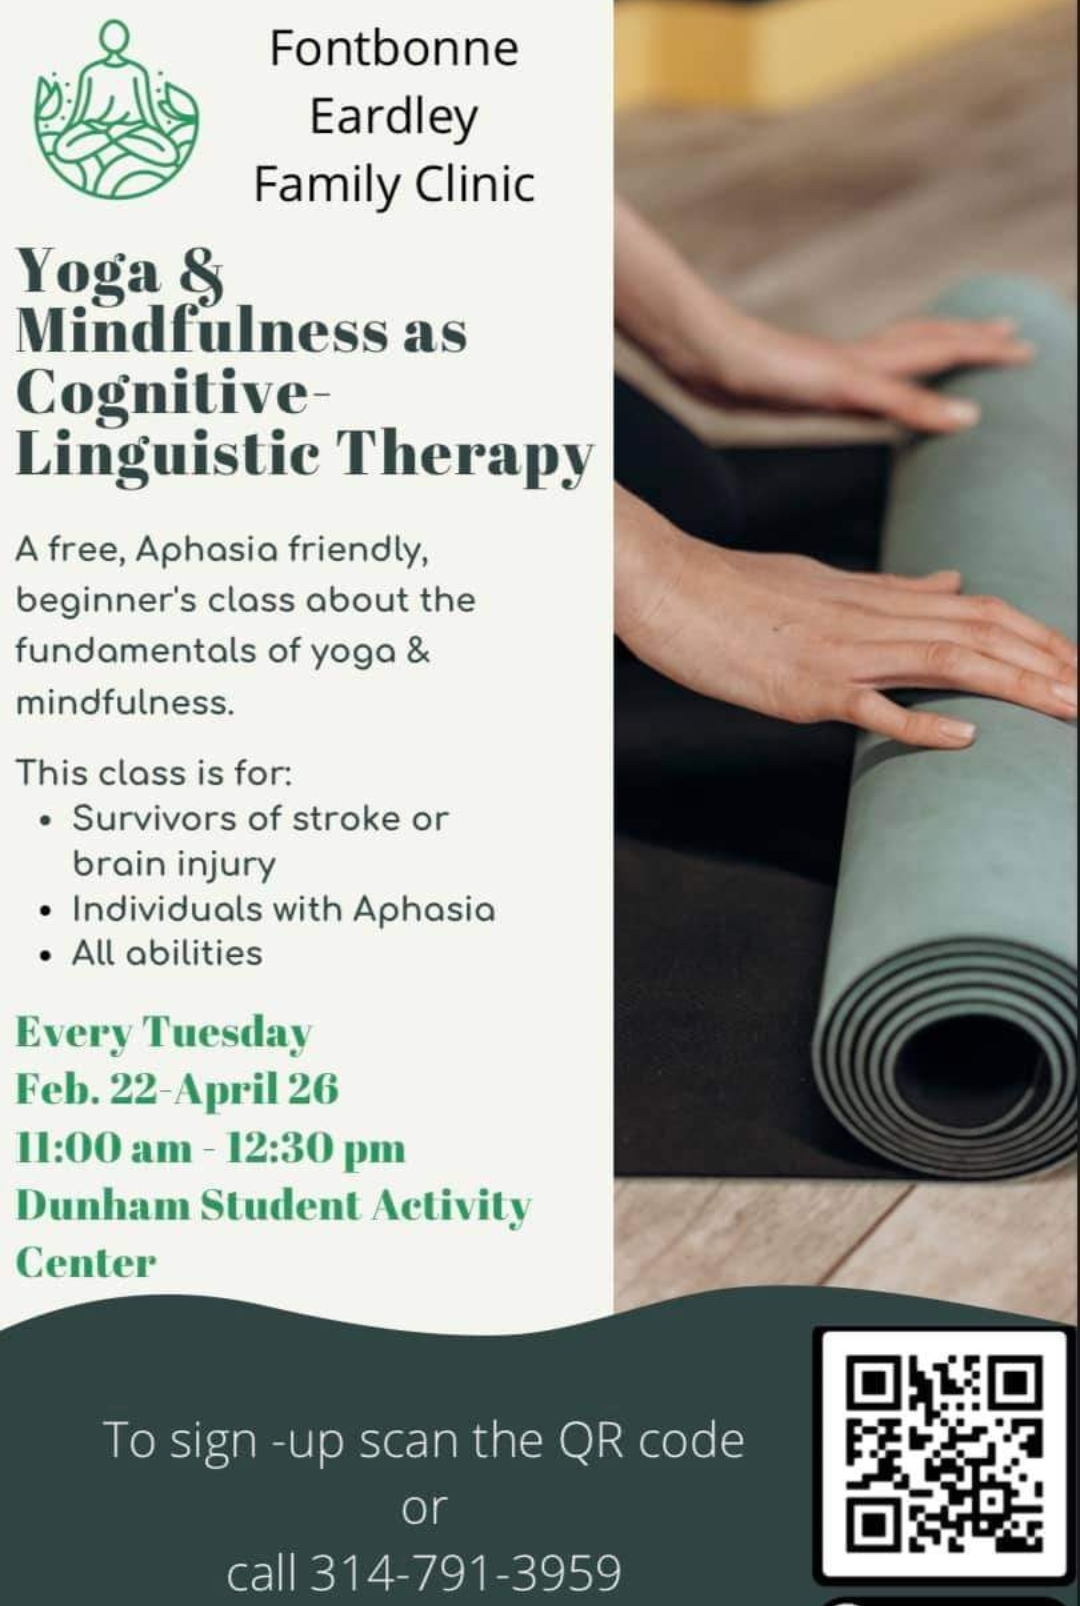 yoga and mindfulness as cognitive linguistic therapy event flyer